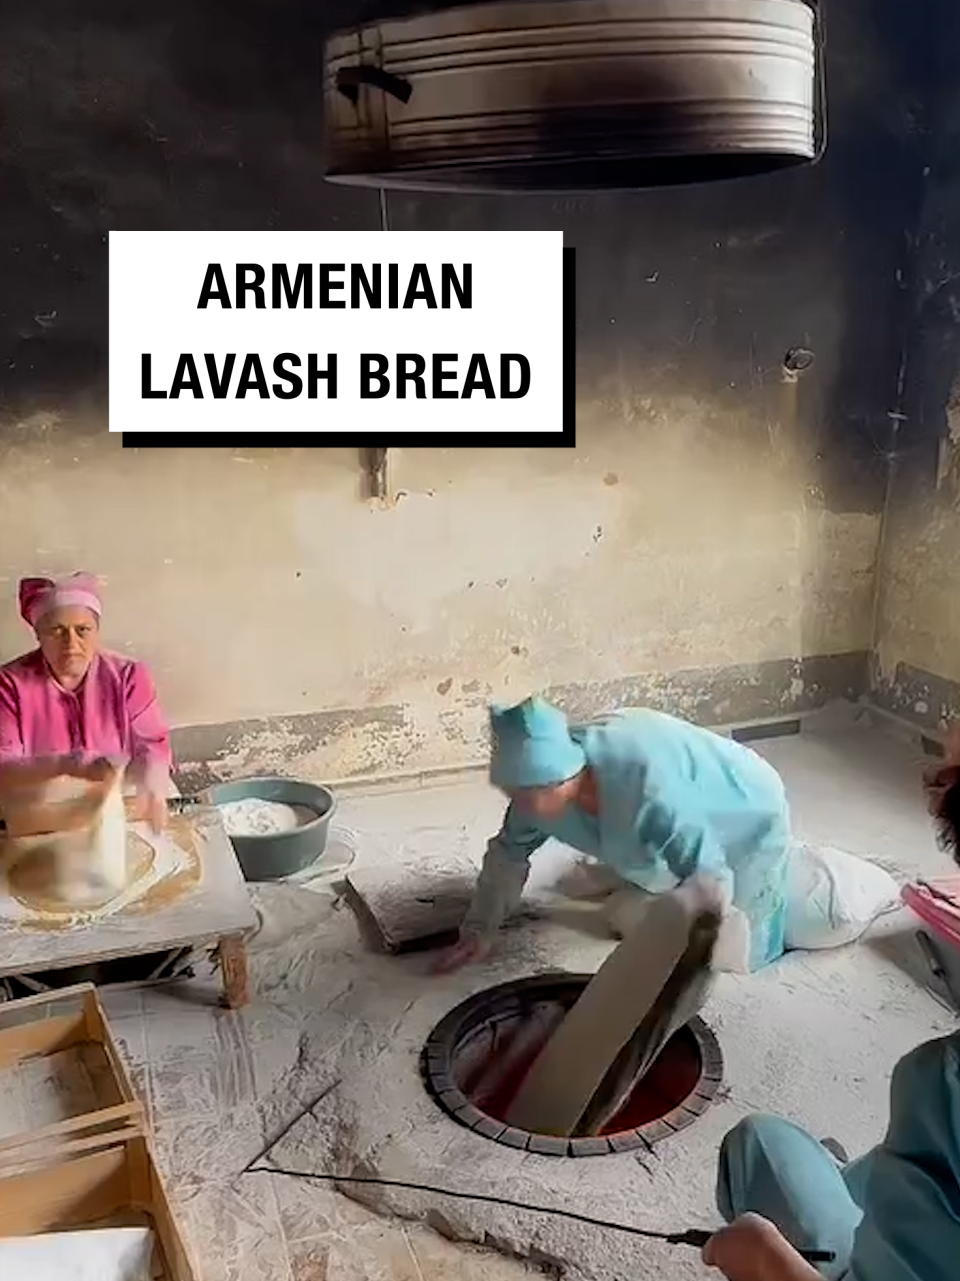 We want to try some now! 🤩🥖 🎥 stepshots #UNILAD #fyp #foryou #foryoupage #armenia #armenian #bread #breadtok #lavash #lavashbread #culture #tradition #food #foodtiktok